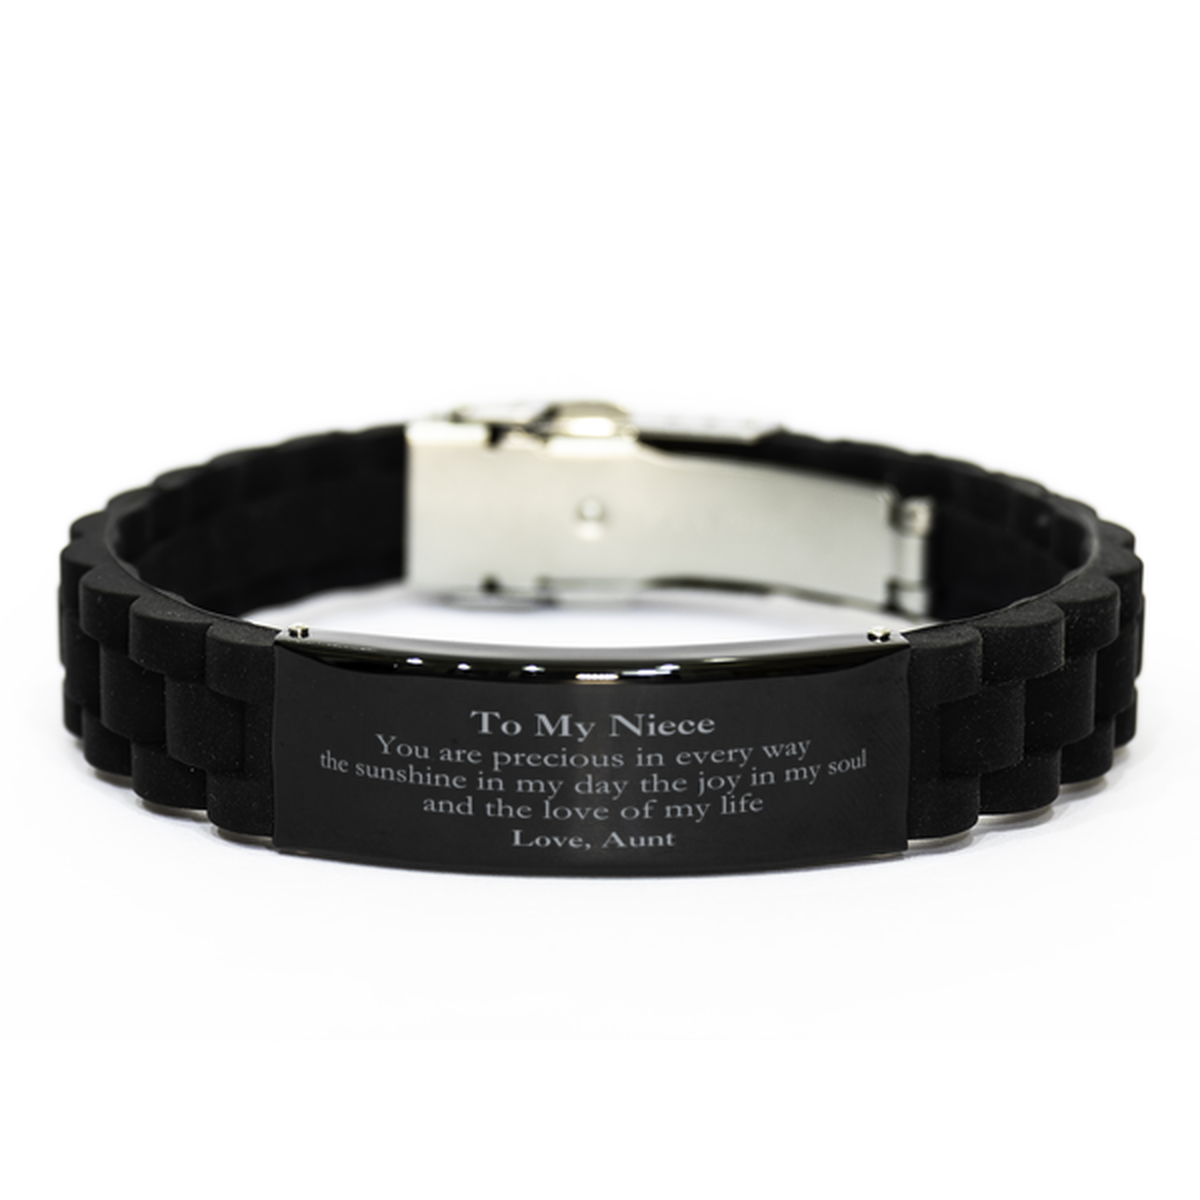 Graduation Gifts for Niece Black Glidelock Clasp Bracelet Present from Aunt, Christmas Niece Birthday Gifts Niece You are precious in every way the sunshine in my day. Love, Aunt